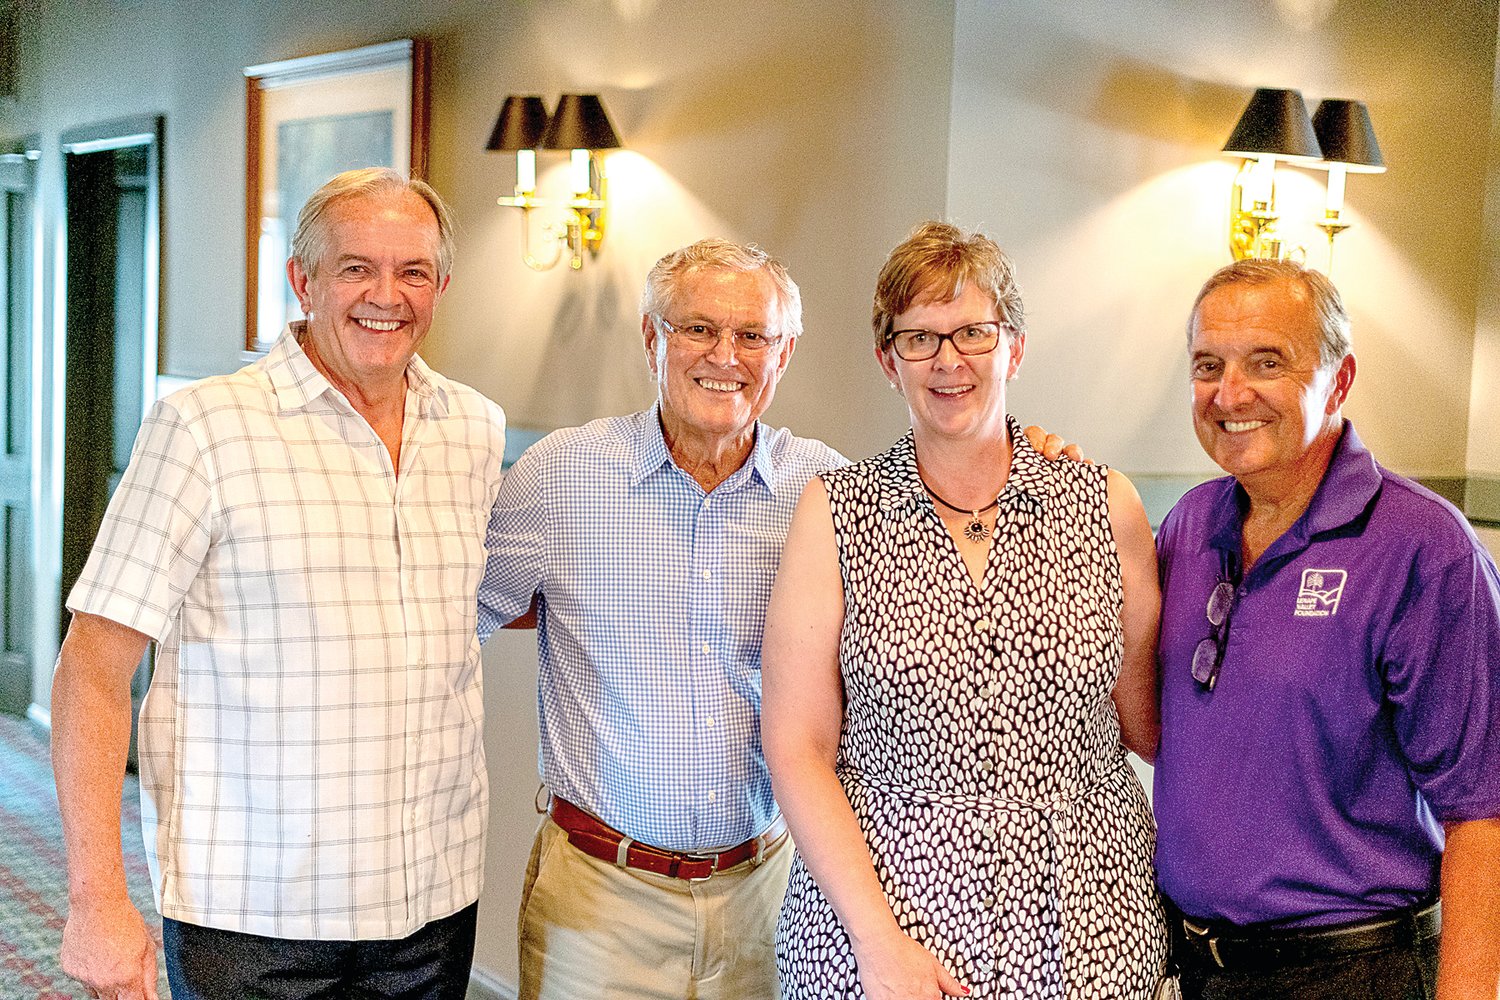 Doylestown Mayor Ron Strouse, the emcee for the evening; former Philadelphia Eagles coach Dick Vermeil, Sharon Curran, Lenape Valley Foundation CEO; and Robert Rogala, Lenape Valley Foundation board president/golf chairperson. Photograph by Chris Markley.